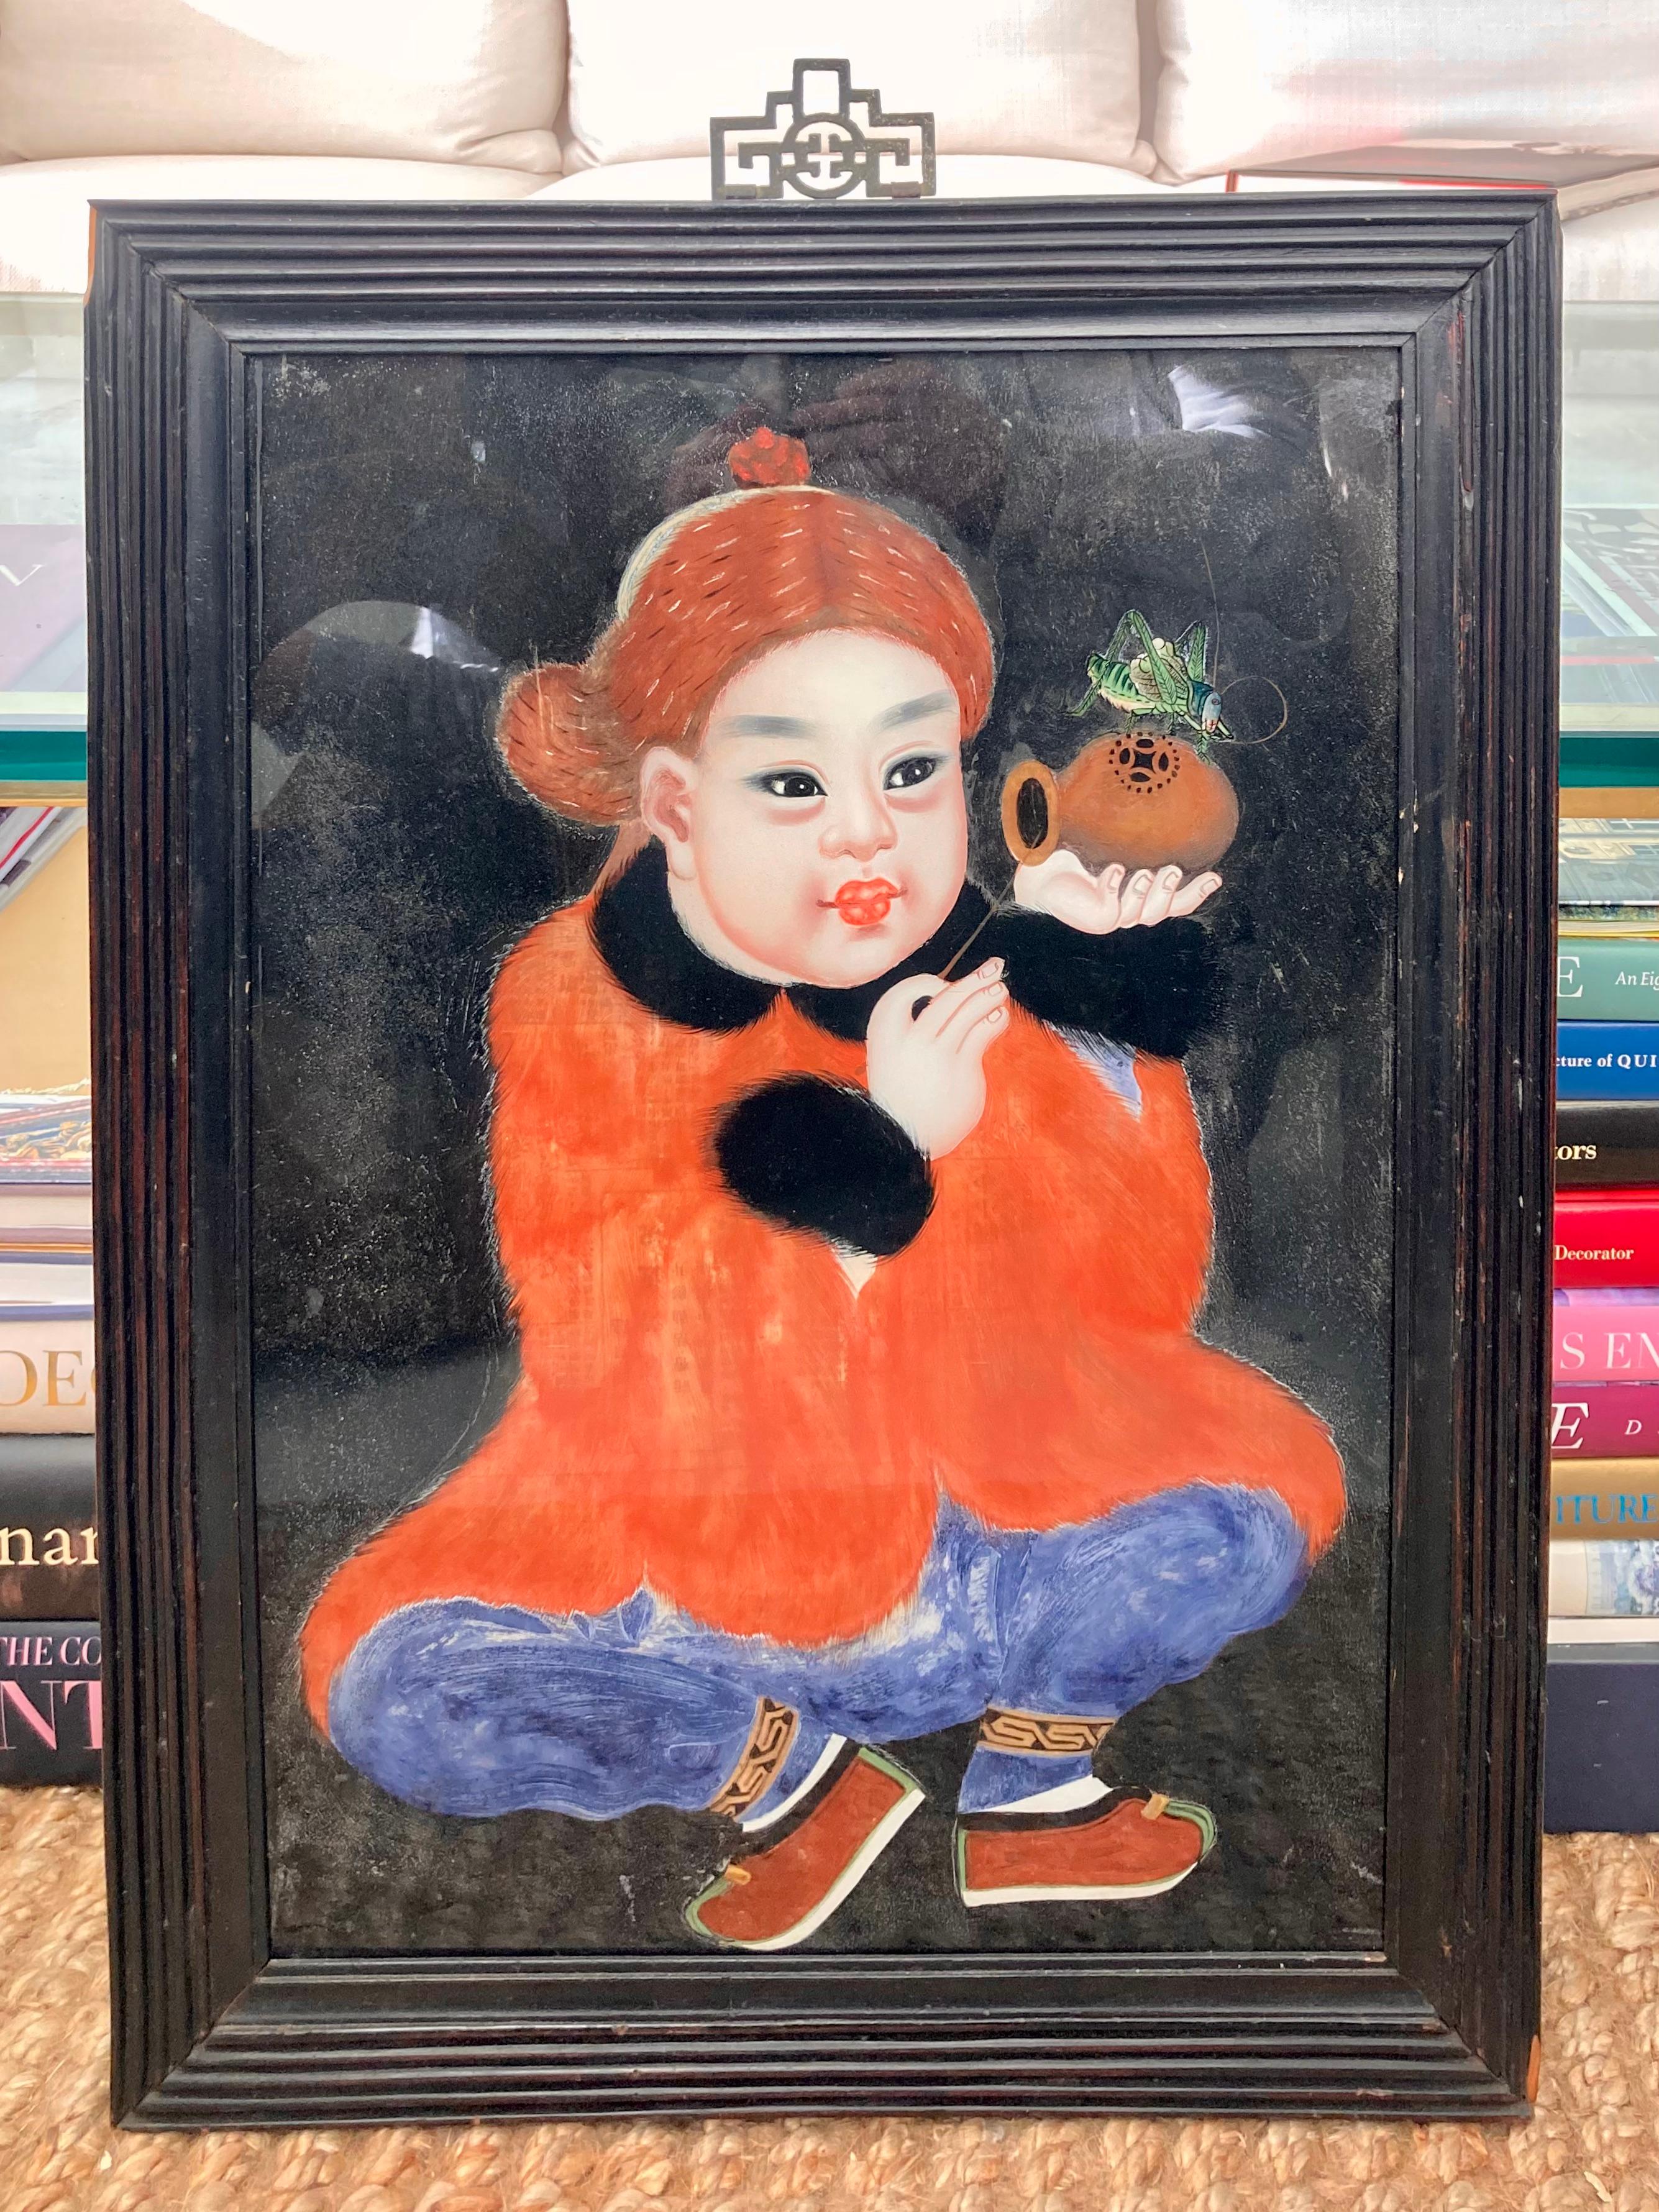 Beautiful reverse painting on glass of young Asian boy. Very rare and also rare subject matter. Very cute boy image. This is 19th Century. Great colors.